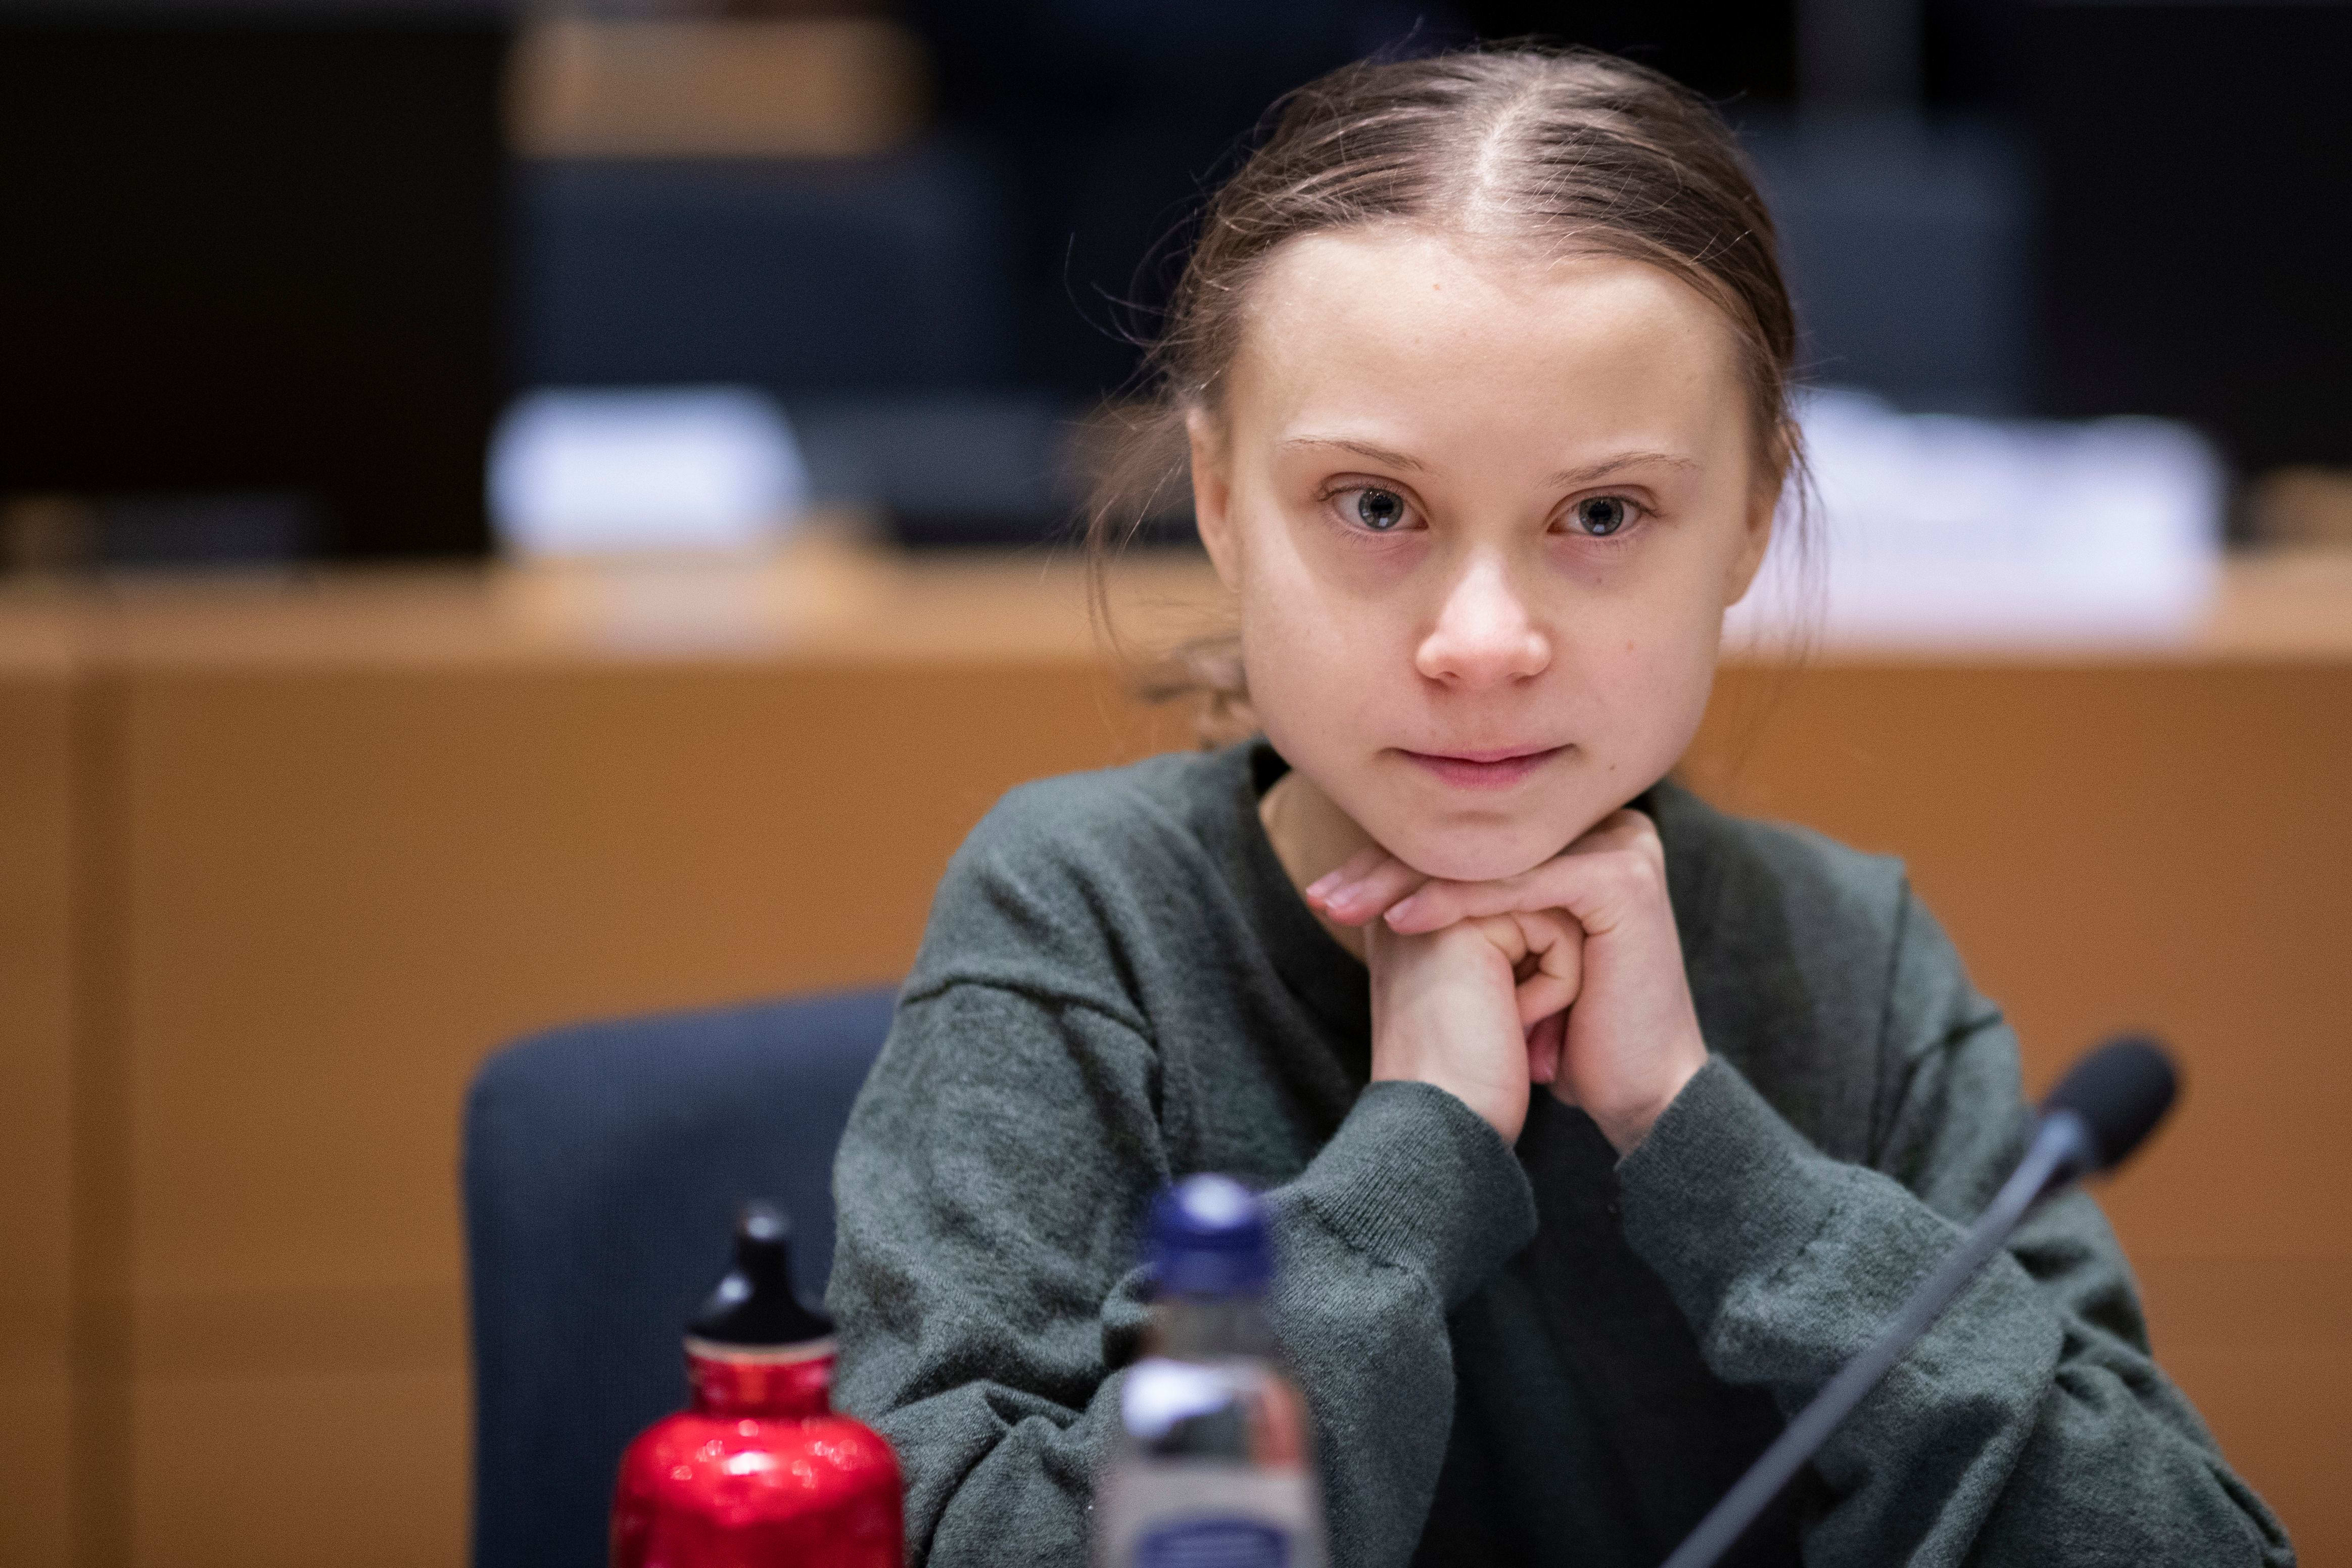 The European Unions proposed climate law has not gone down well with Greta Thunberg